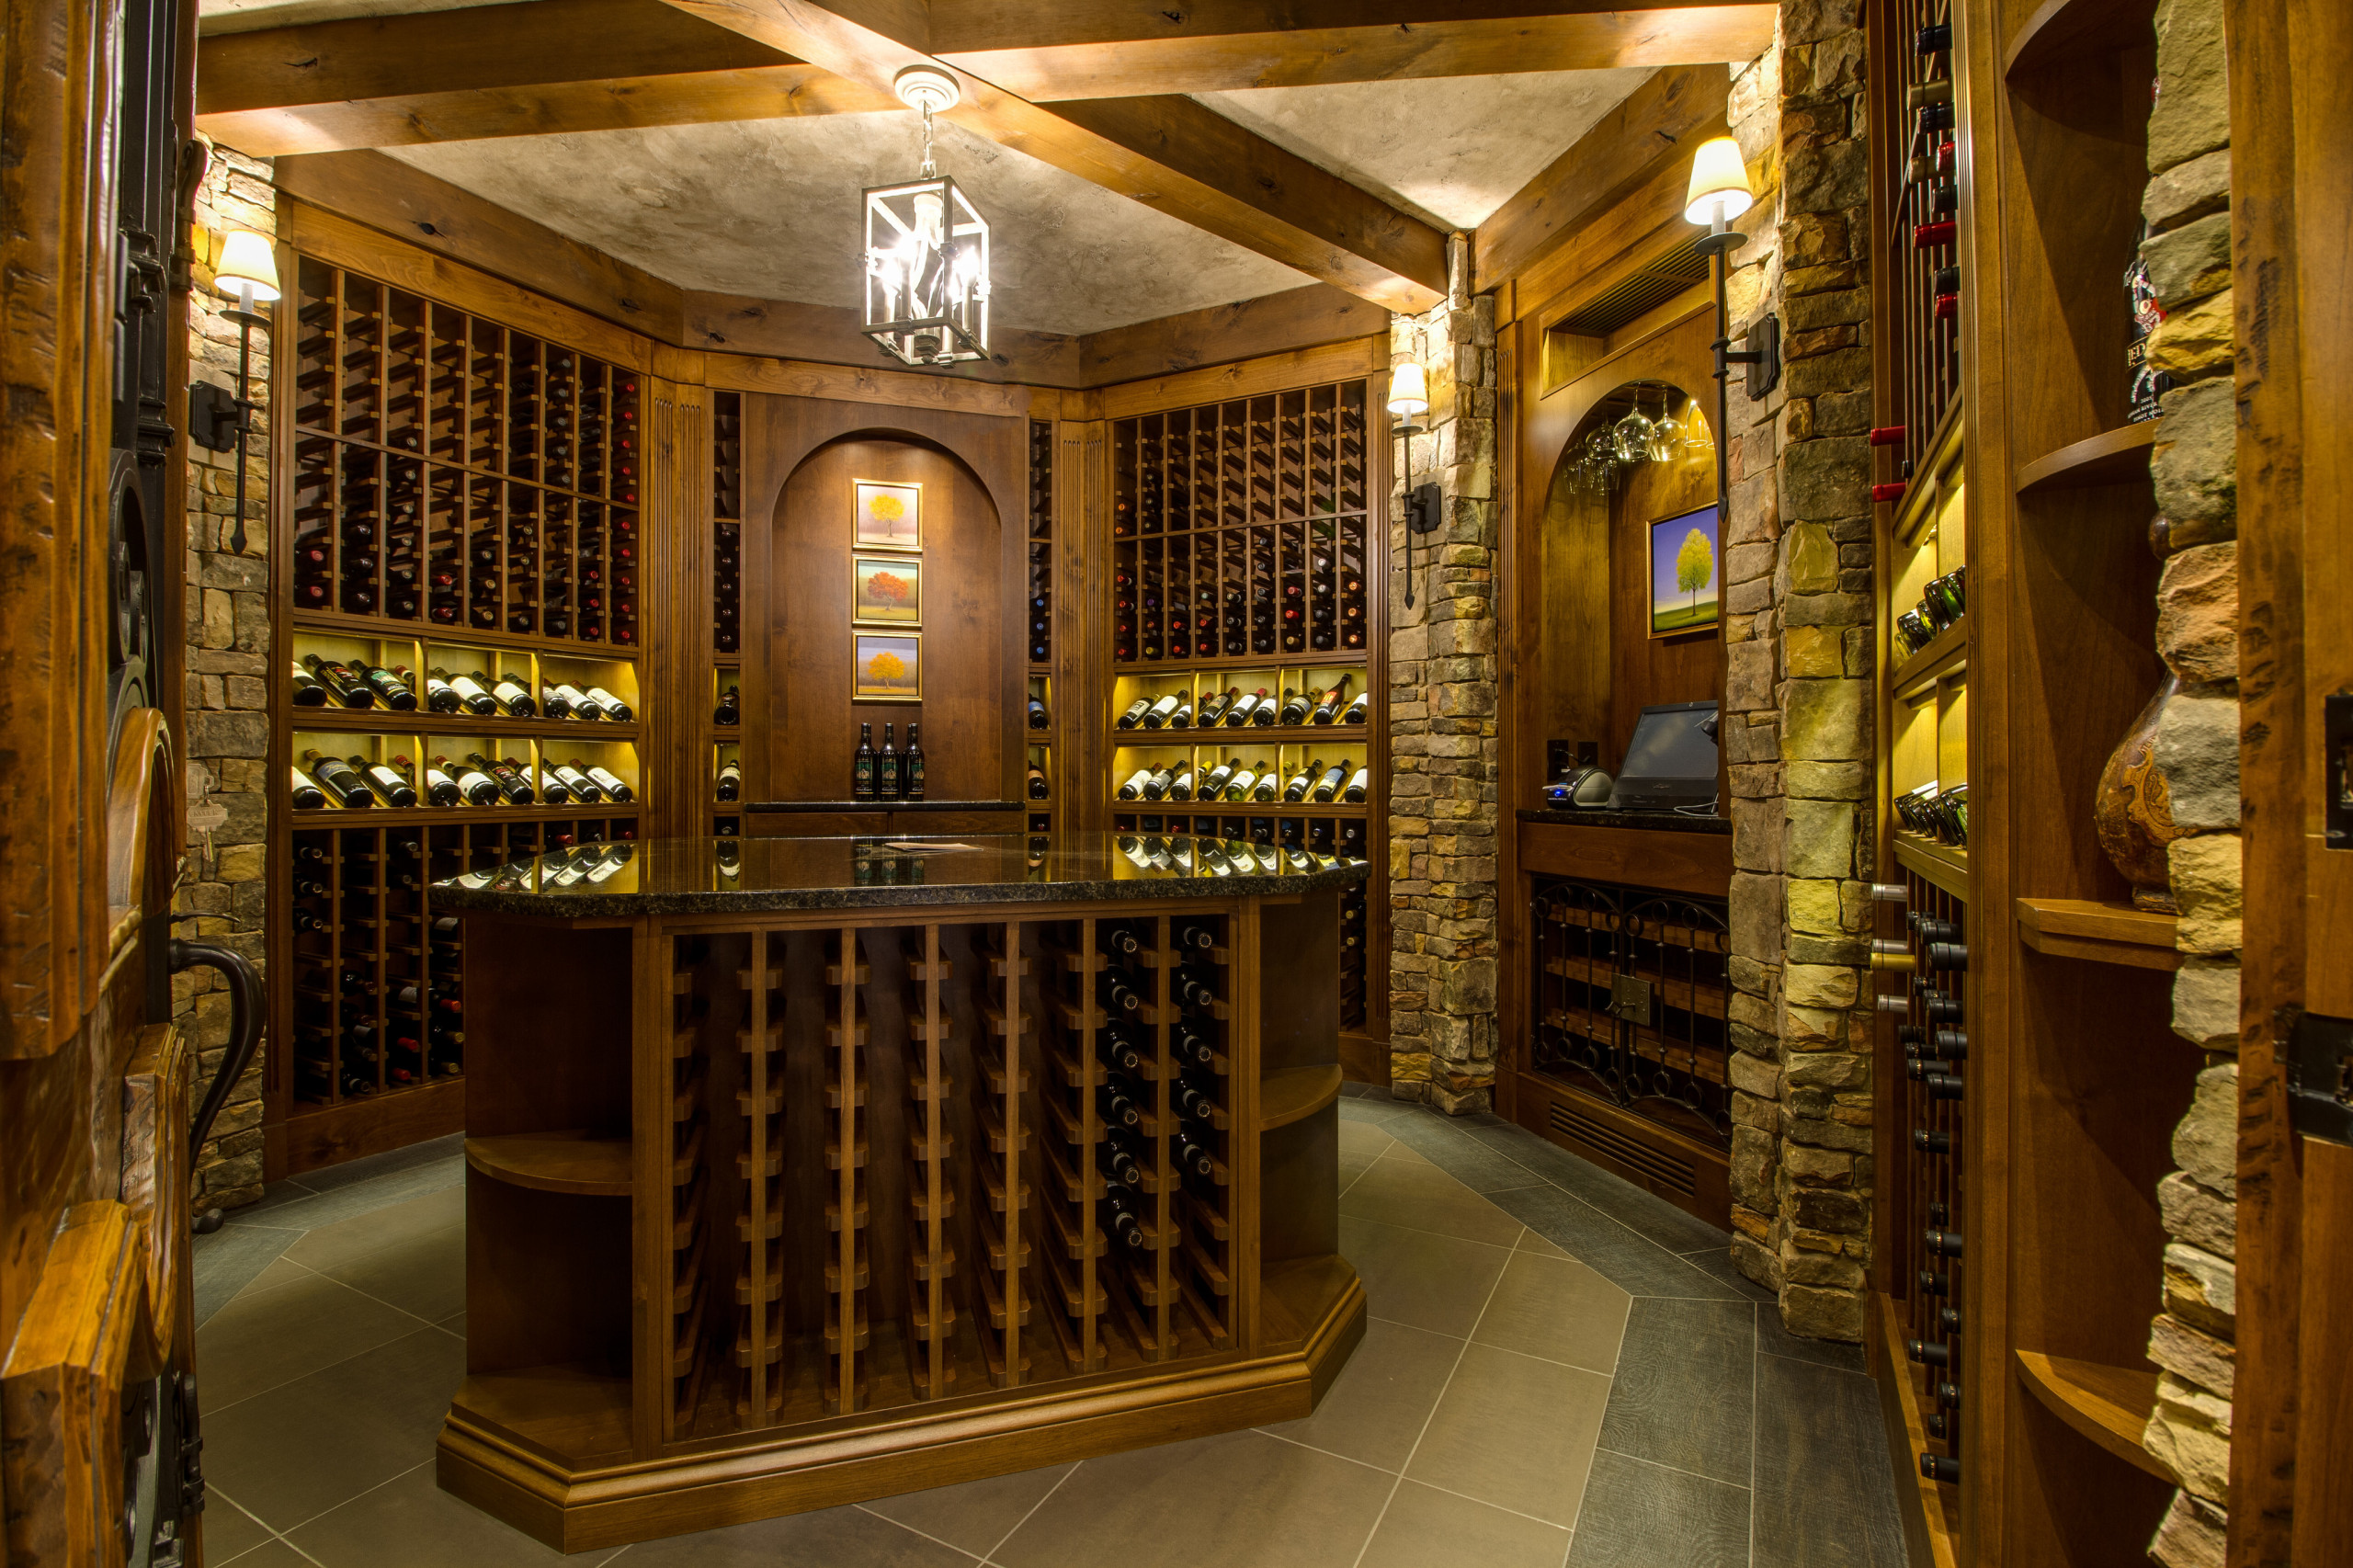 All of our Custom Wine Cellars feature beautiful lighting